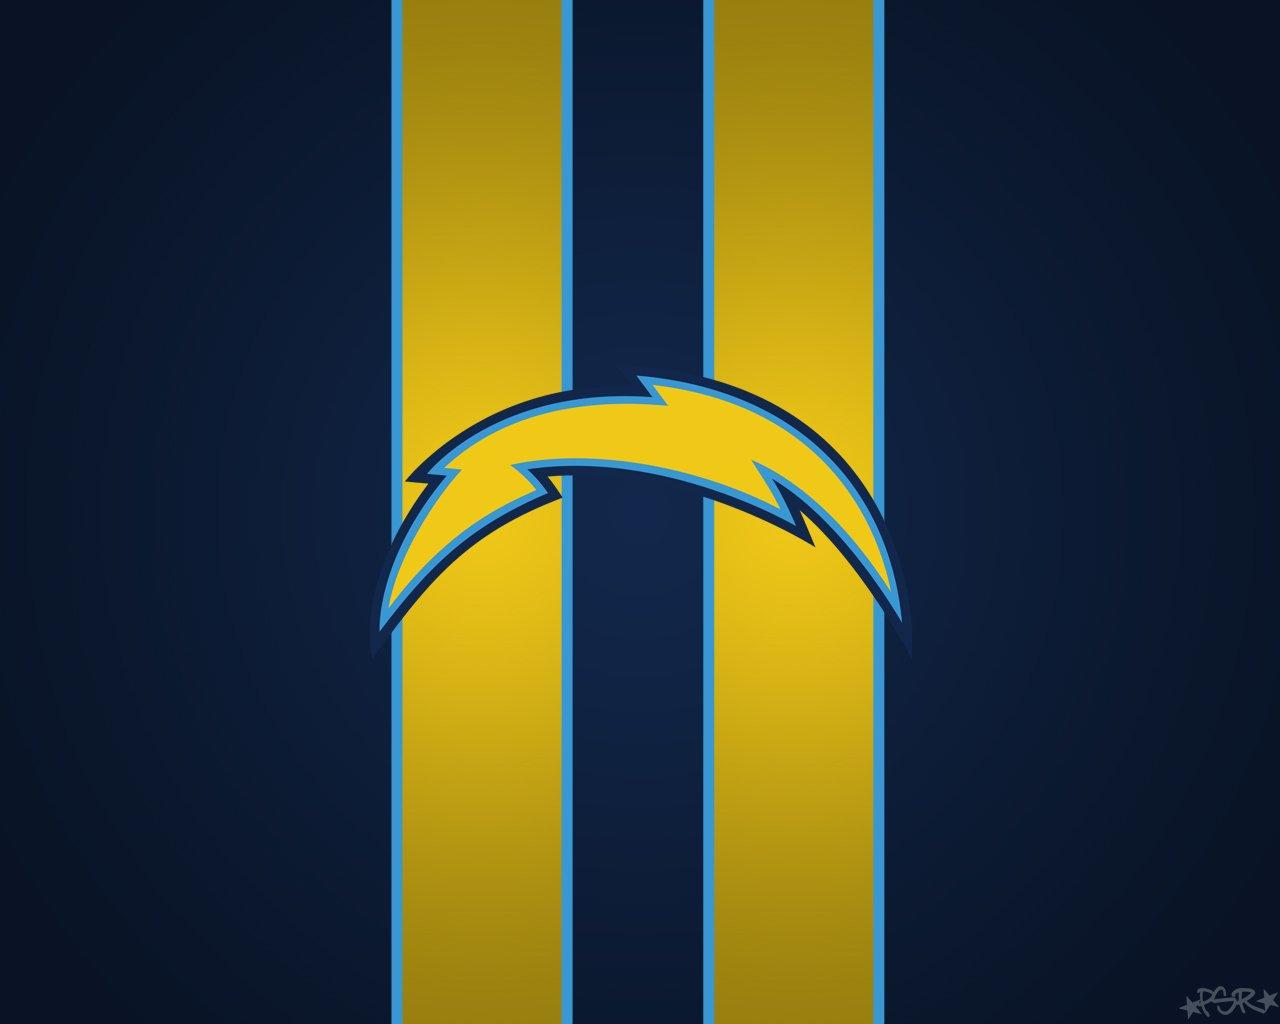 Download wallpapers Los Angeles Chargers flag 4k blue and yellow 3D  waves NFL american football team Los Angeles Chargers logo american  football Los Angeles Chargers LA Chargers for desktop free Pictures for